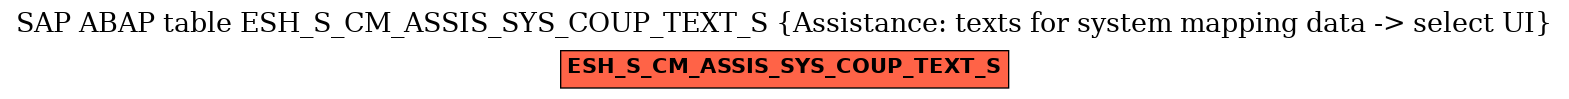 E-R Diagram for table ESH_S_CM_ASSIS_SYS_COUP_TEXT_S (Assistance: texts for system mapping data -> select UI)